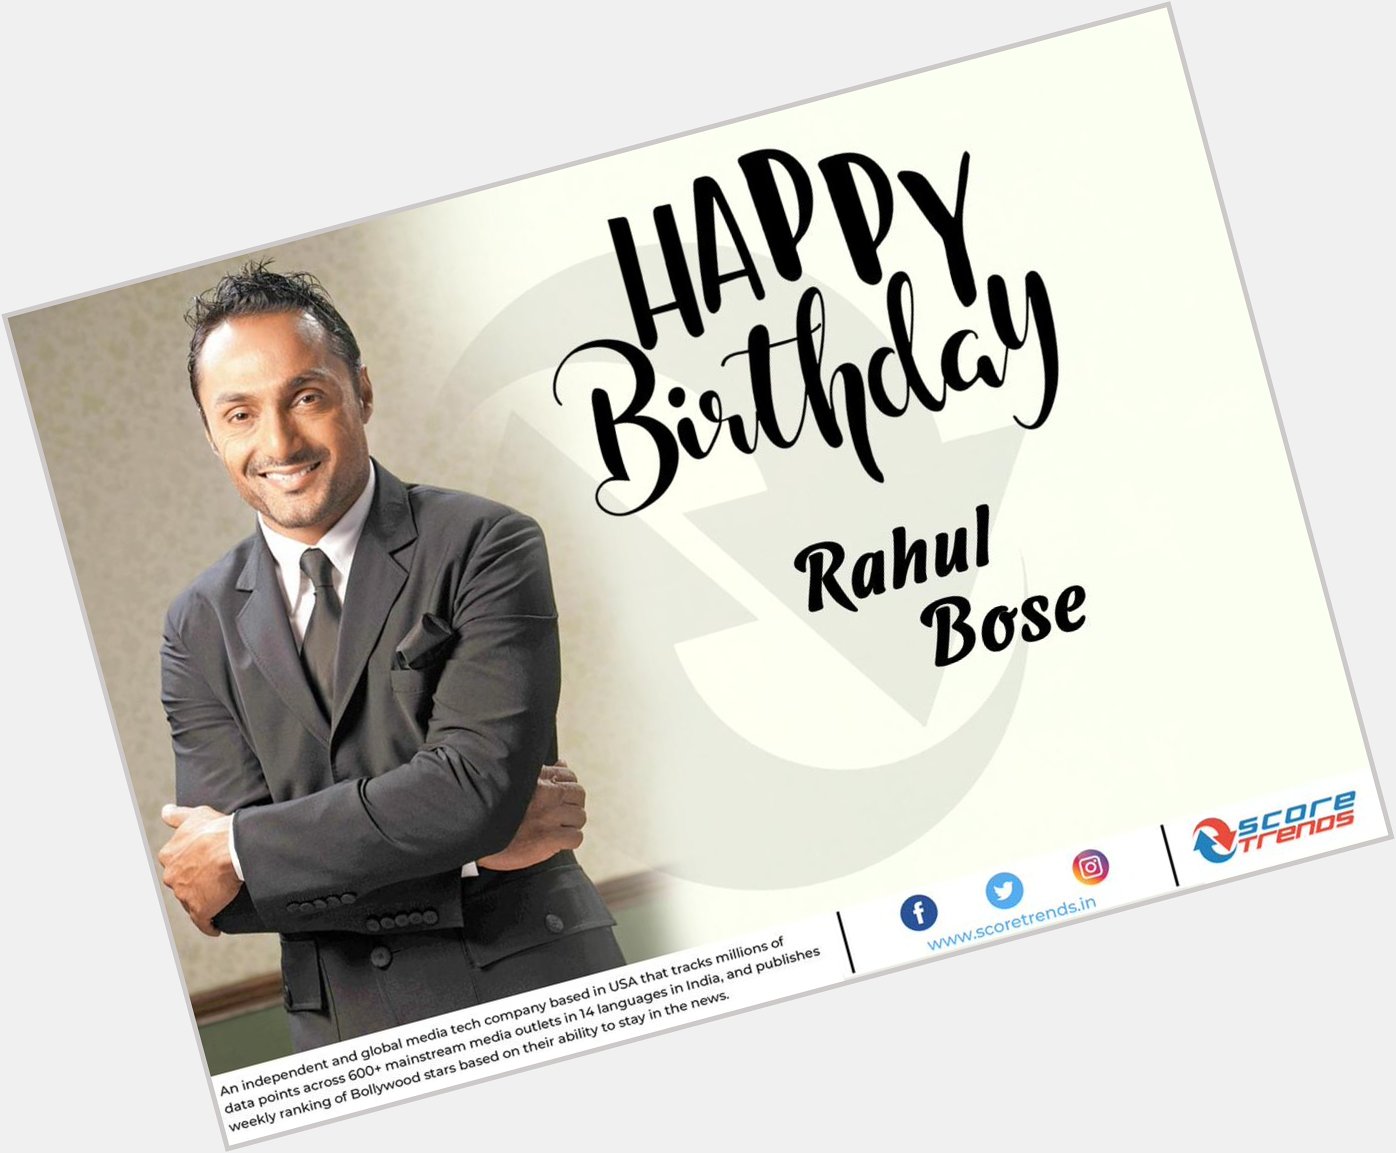 Score Trends wishes Rahul Bose a Happy Birthday!! 